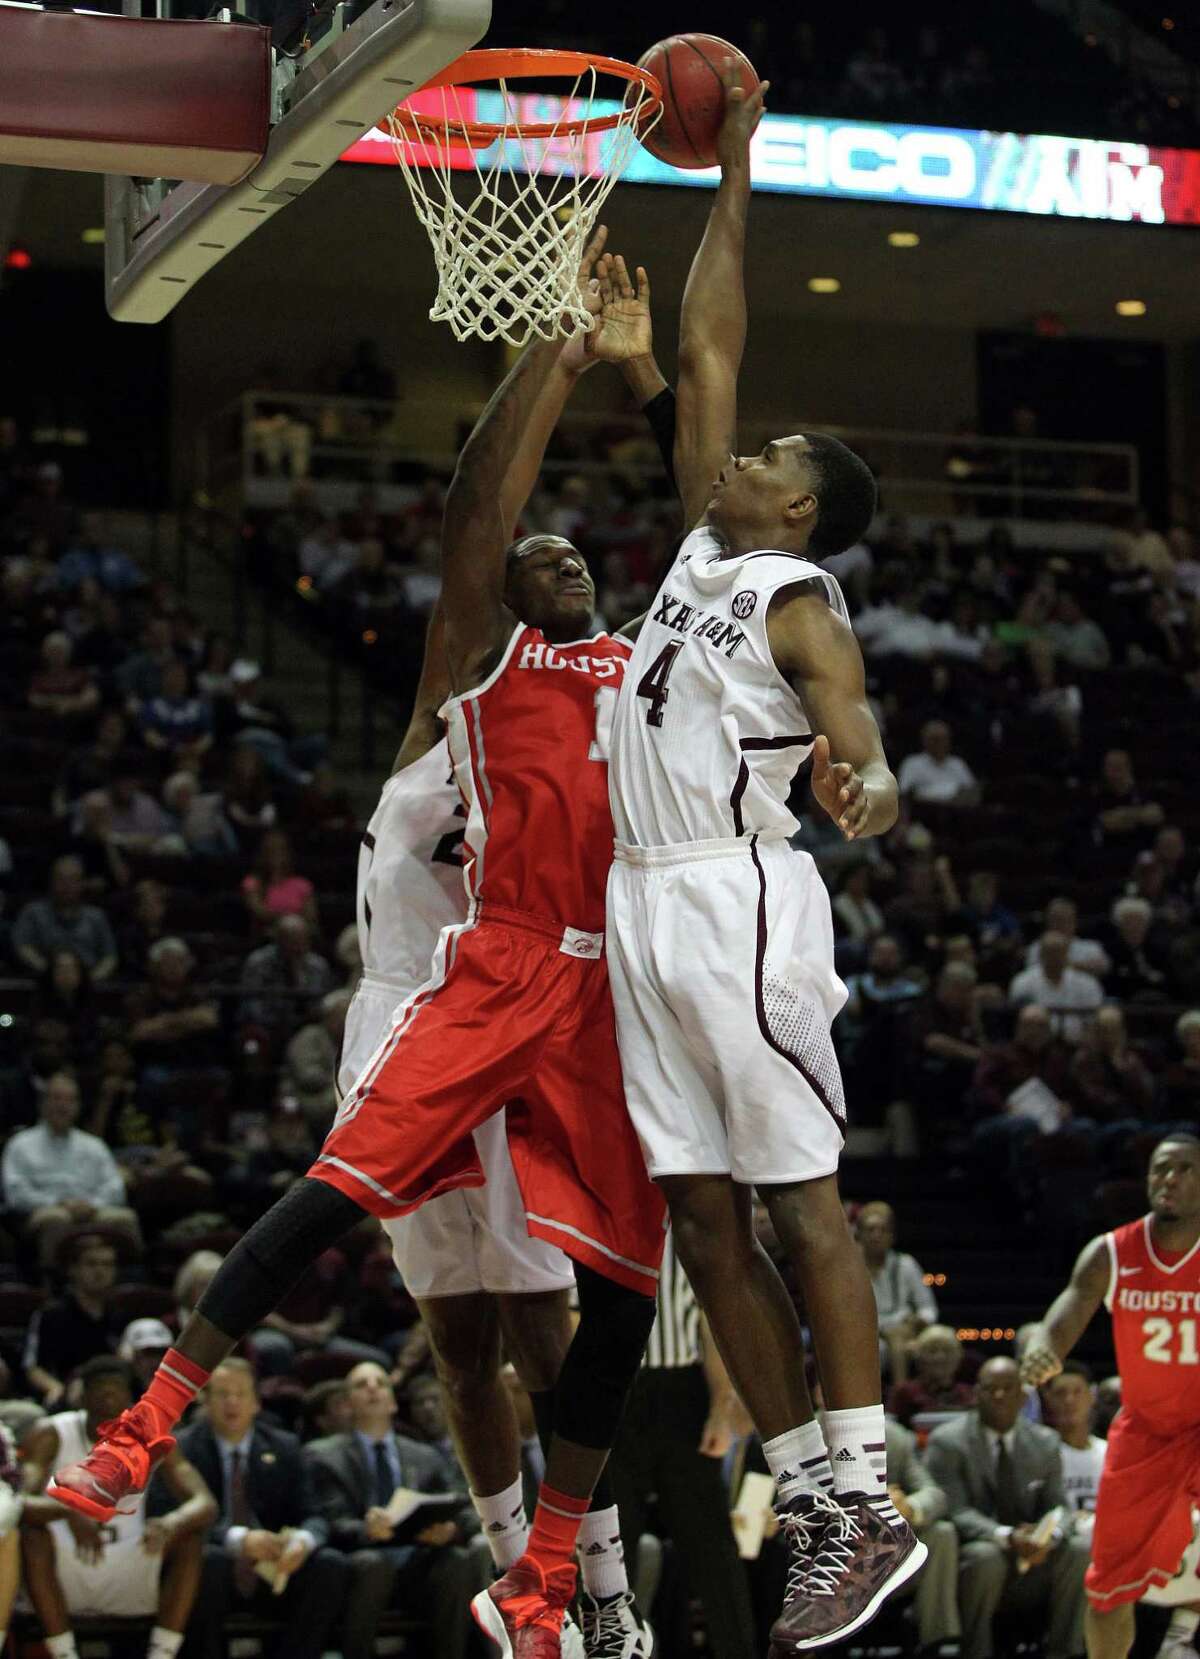 Houston's Mikhail McLean, left, fights for a rebound with Texas A&M's Tavario Miller during the first half of an NCAA college basketball game, Wednesday, December 3, 2013, at Reed Arena in College Station, TX.